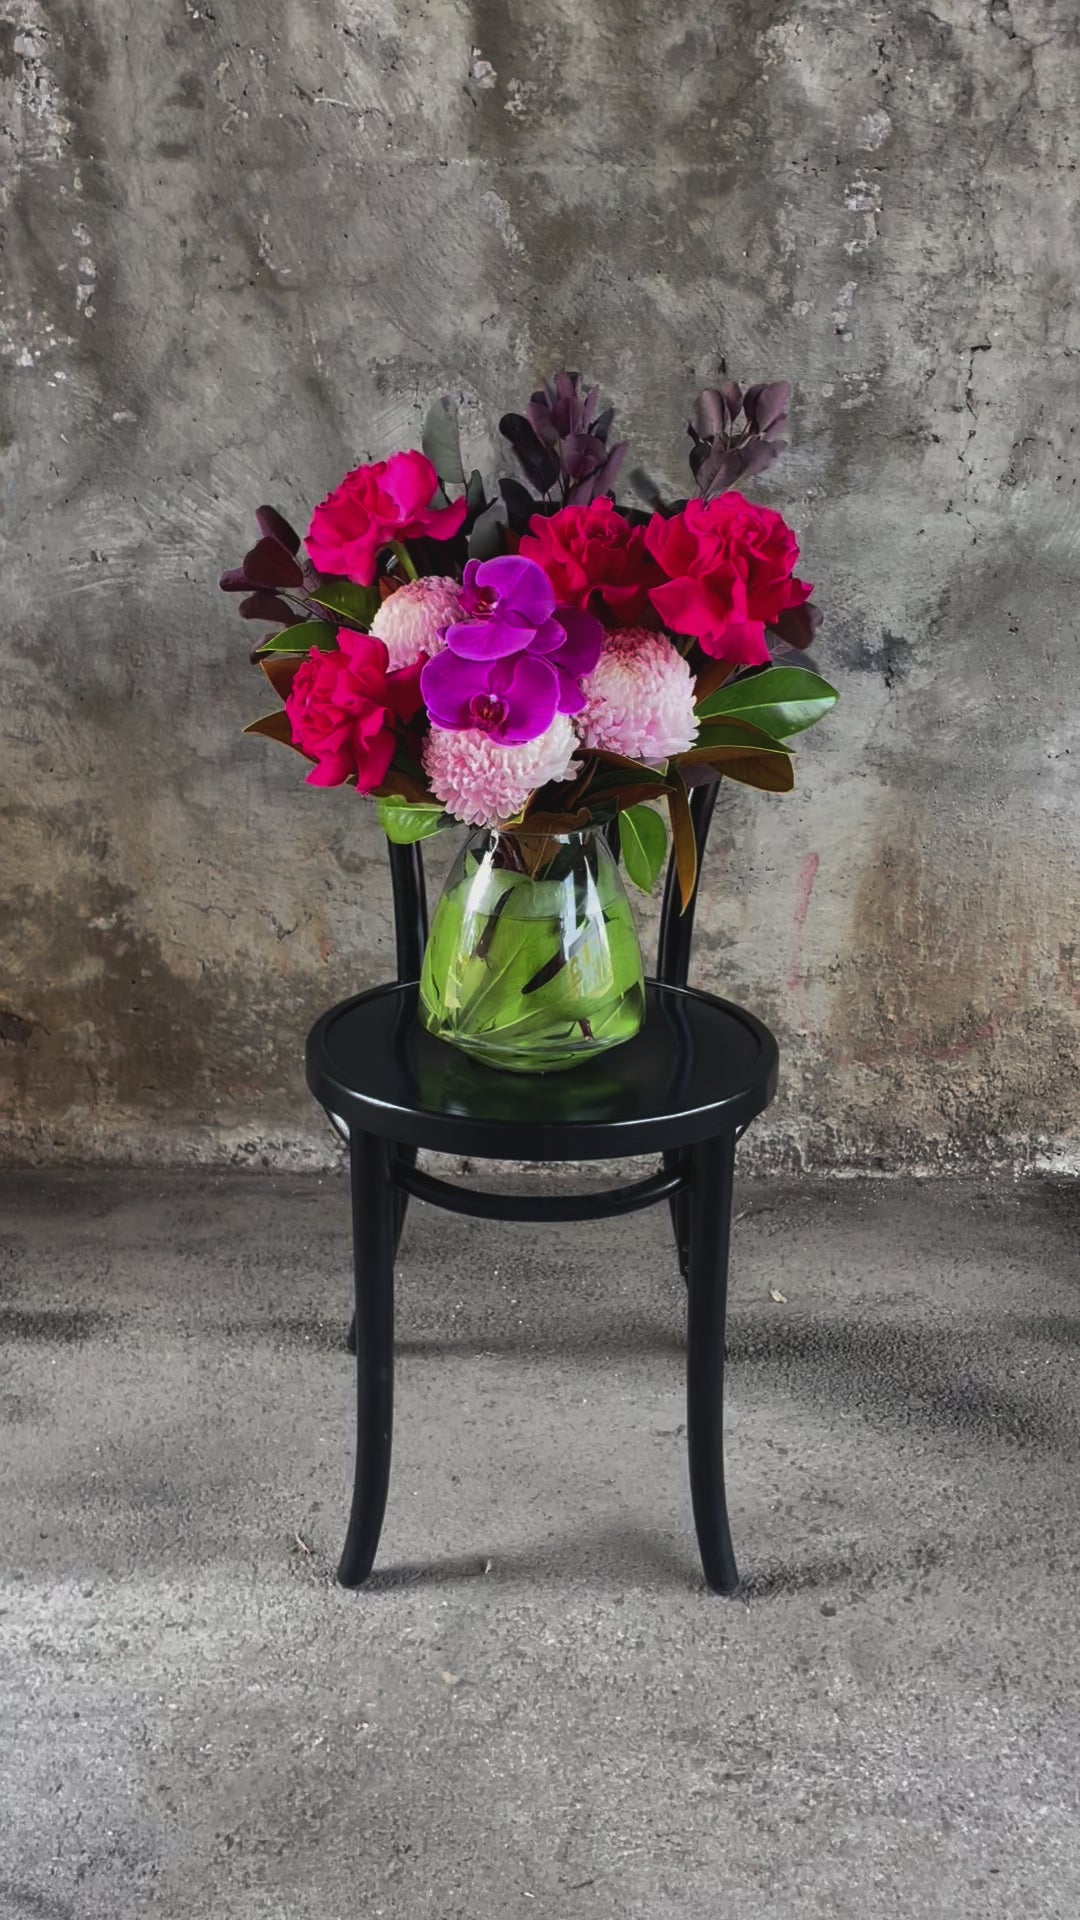 Video of Hot pink, blush, magenta flowers and seasonal foliage displayed in a leaf lined tapered vase, sitting on a black bentwood chair with a concrete wall background.